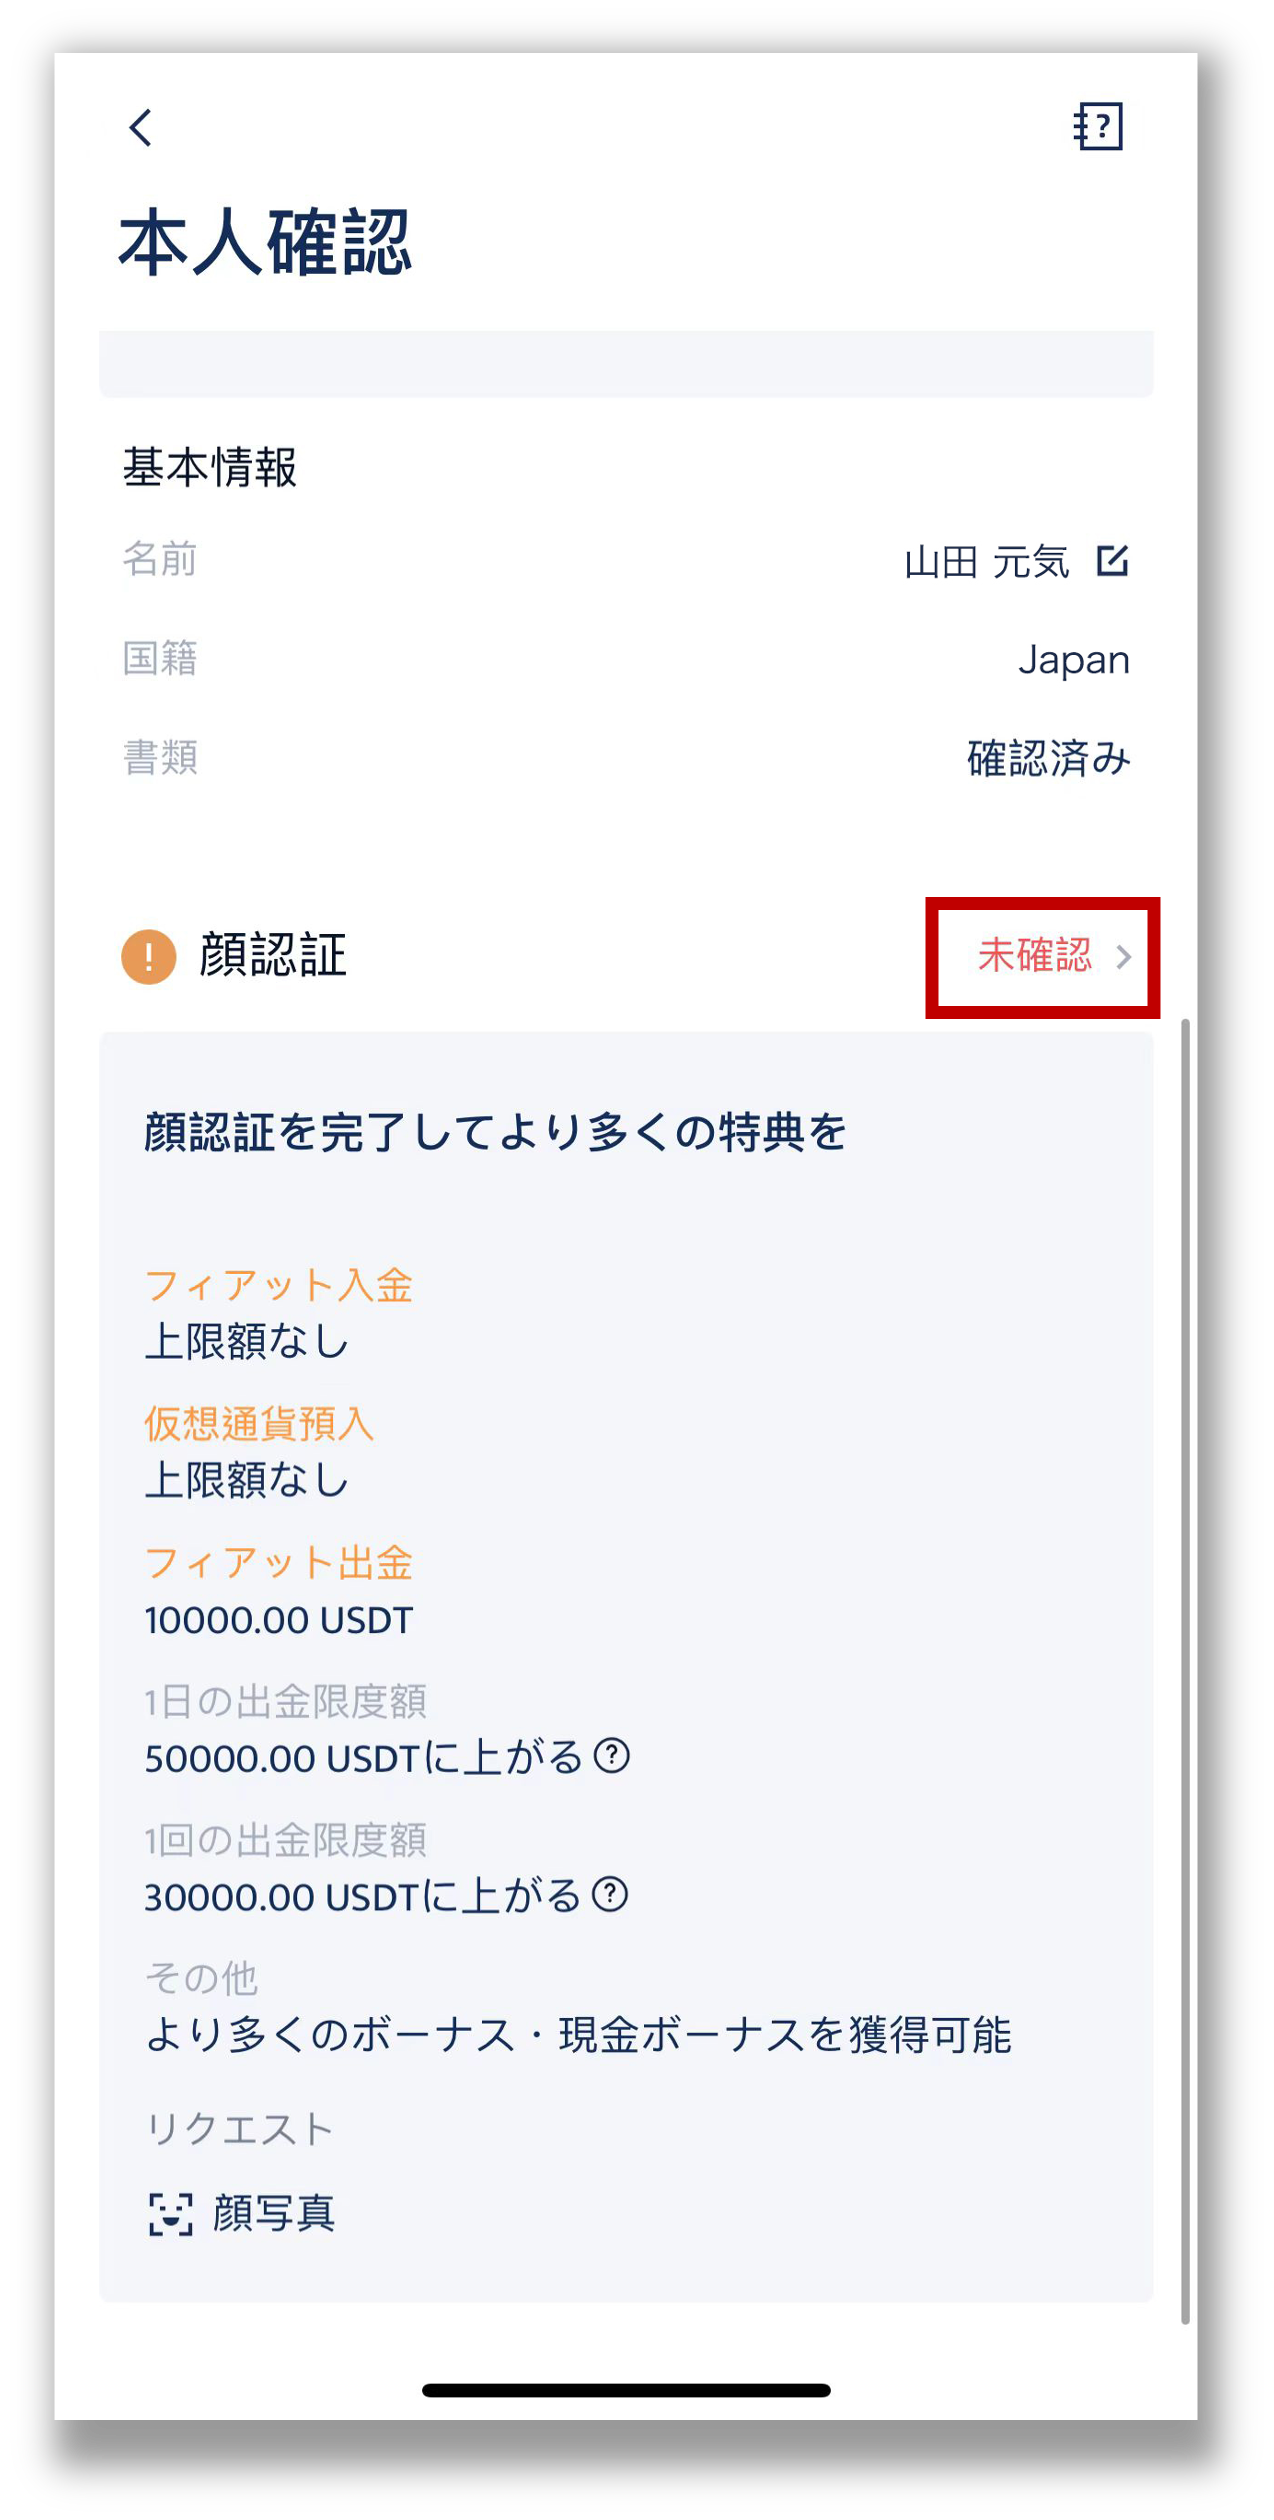 How to KYC-JP-13.png